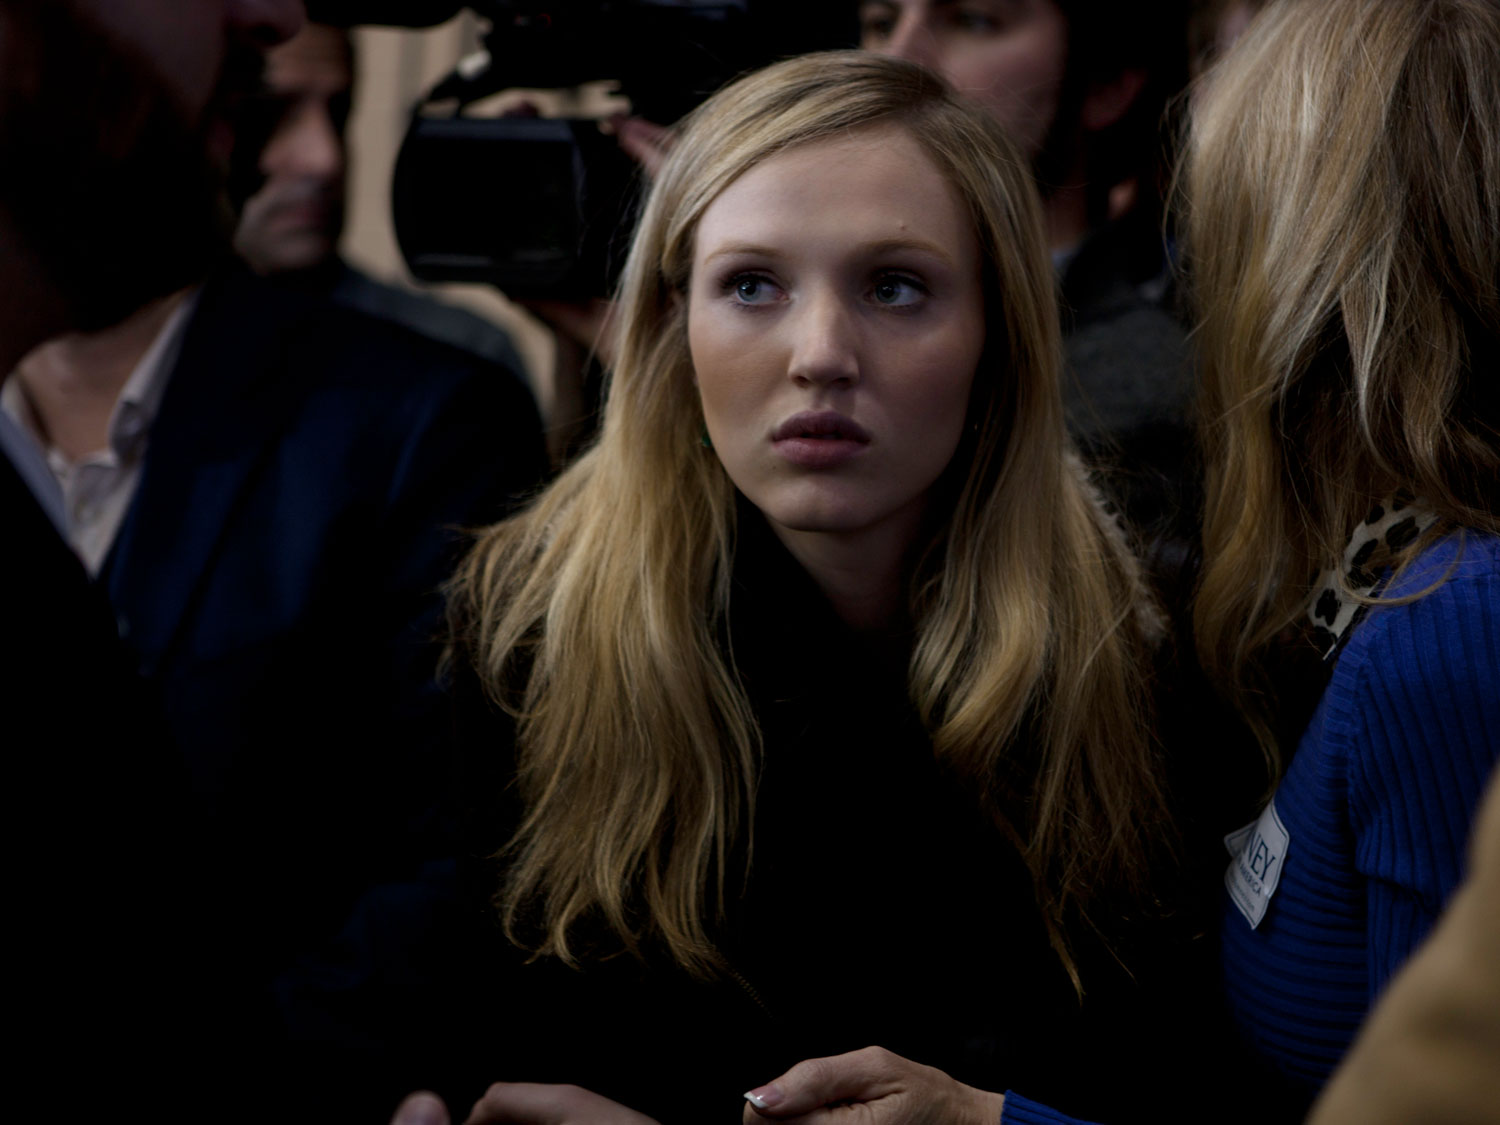 Image: A young woman listens to Mitt Romney during a rally with New Jersey Governor Chris Christie at Exeter High School in Exeter, N.H. Jan. 8, 2012.